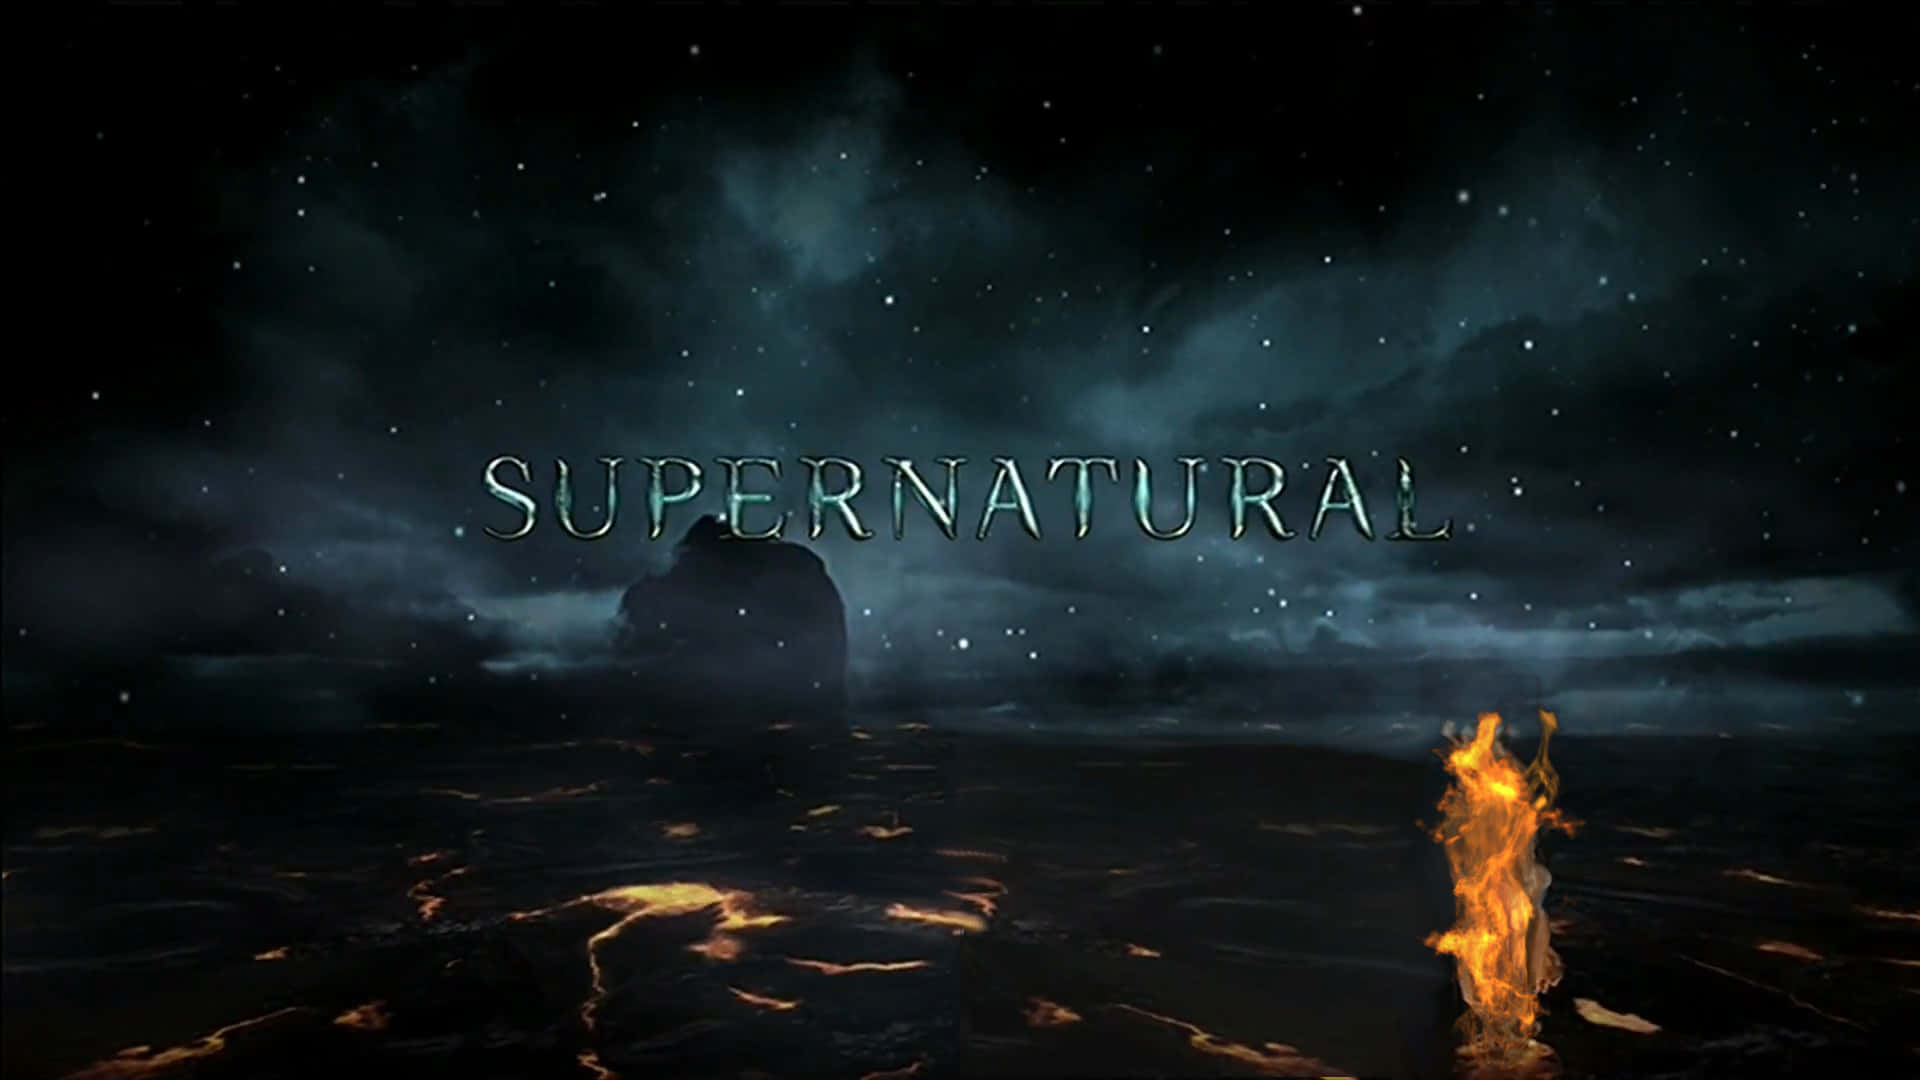 “Mythical Creatures of a Supernatural World” Wallpaper